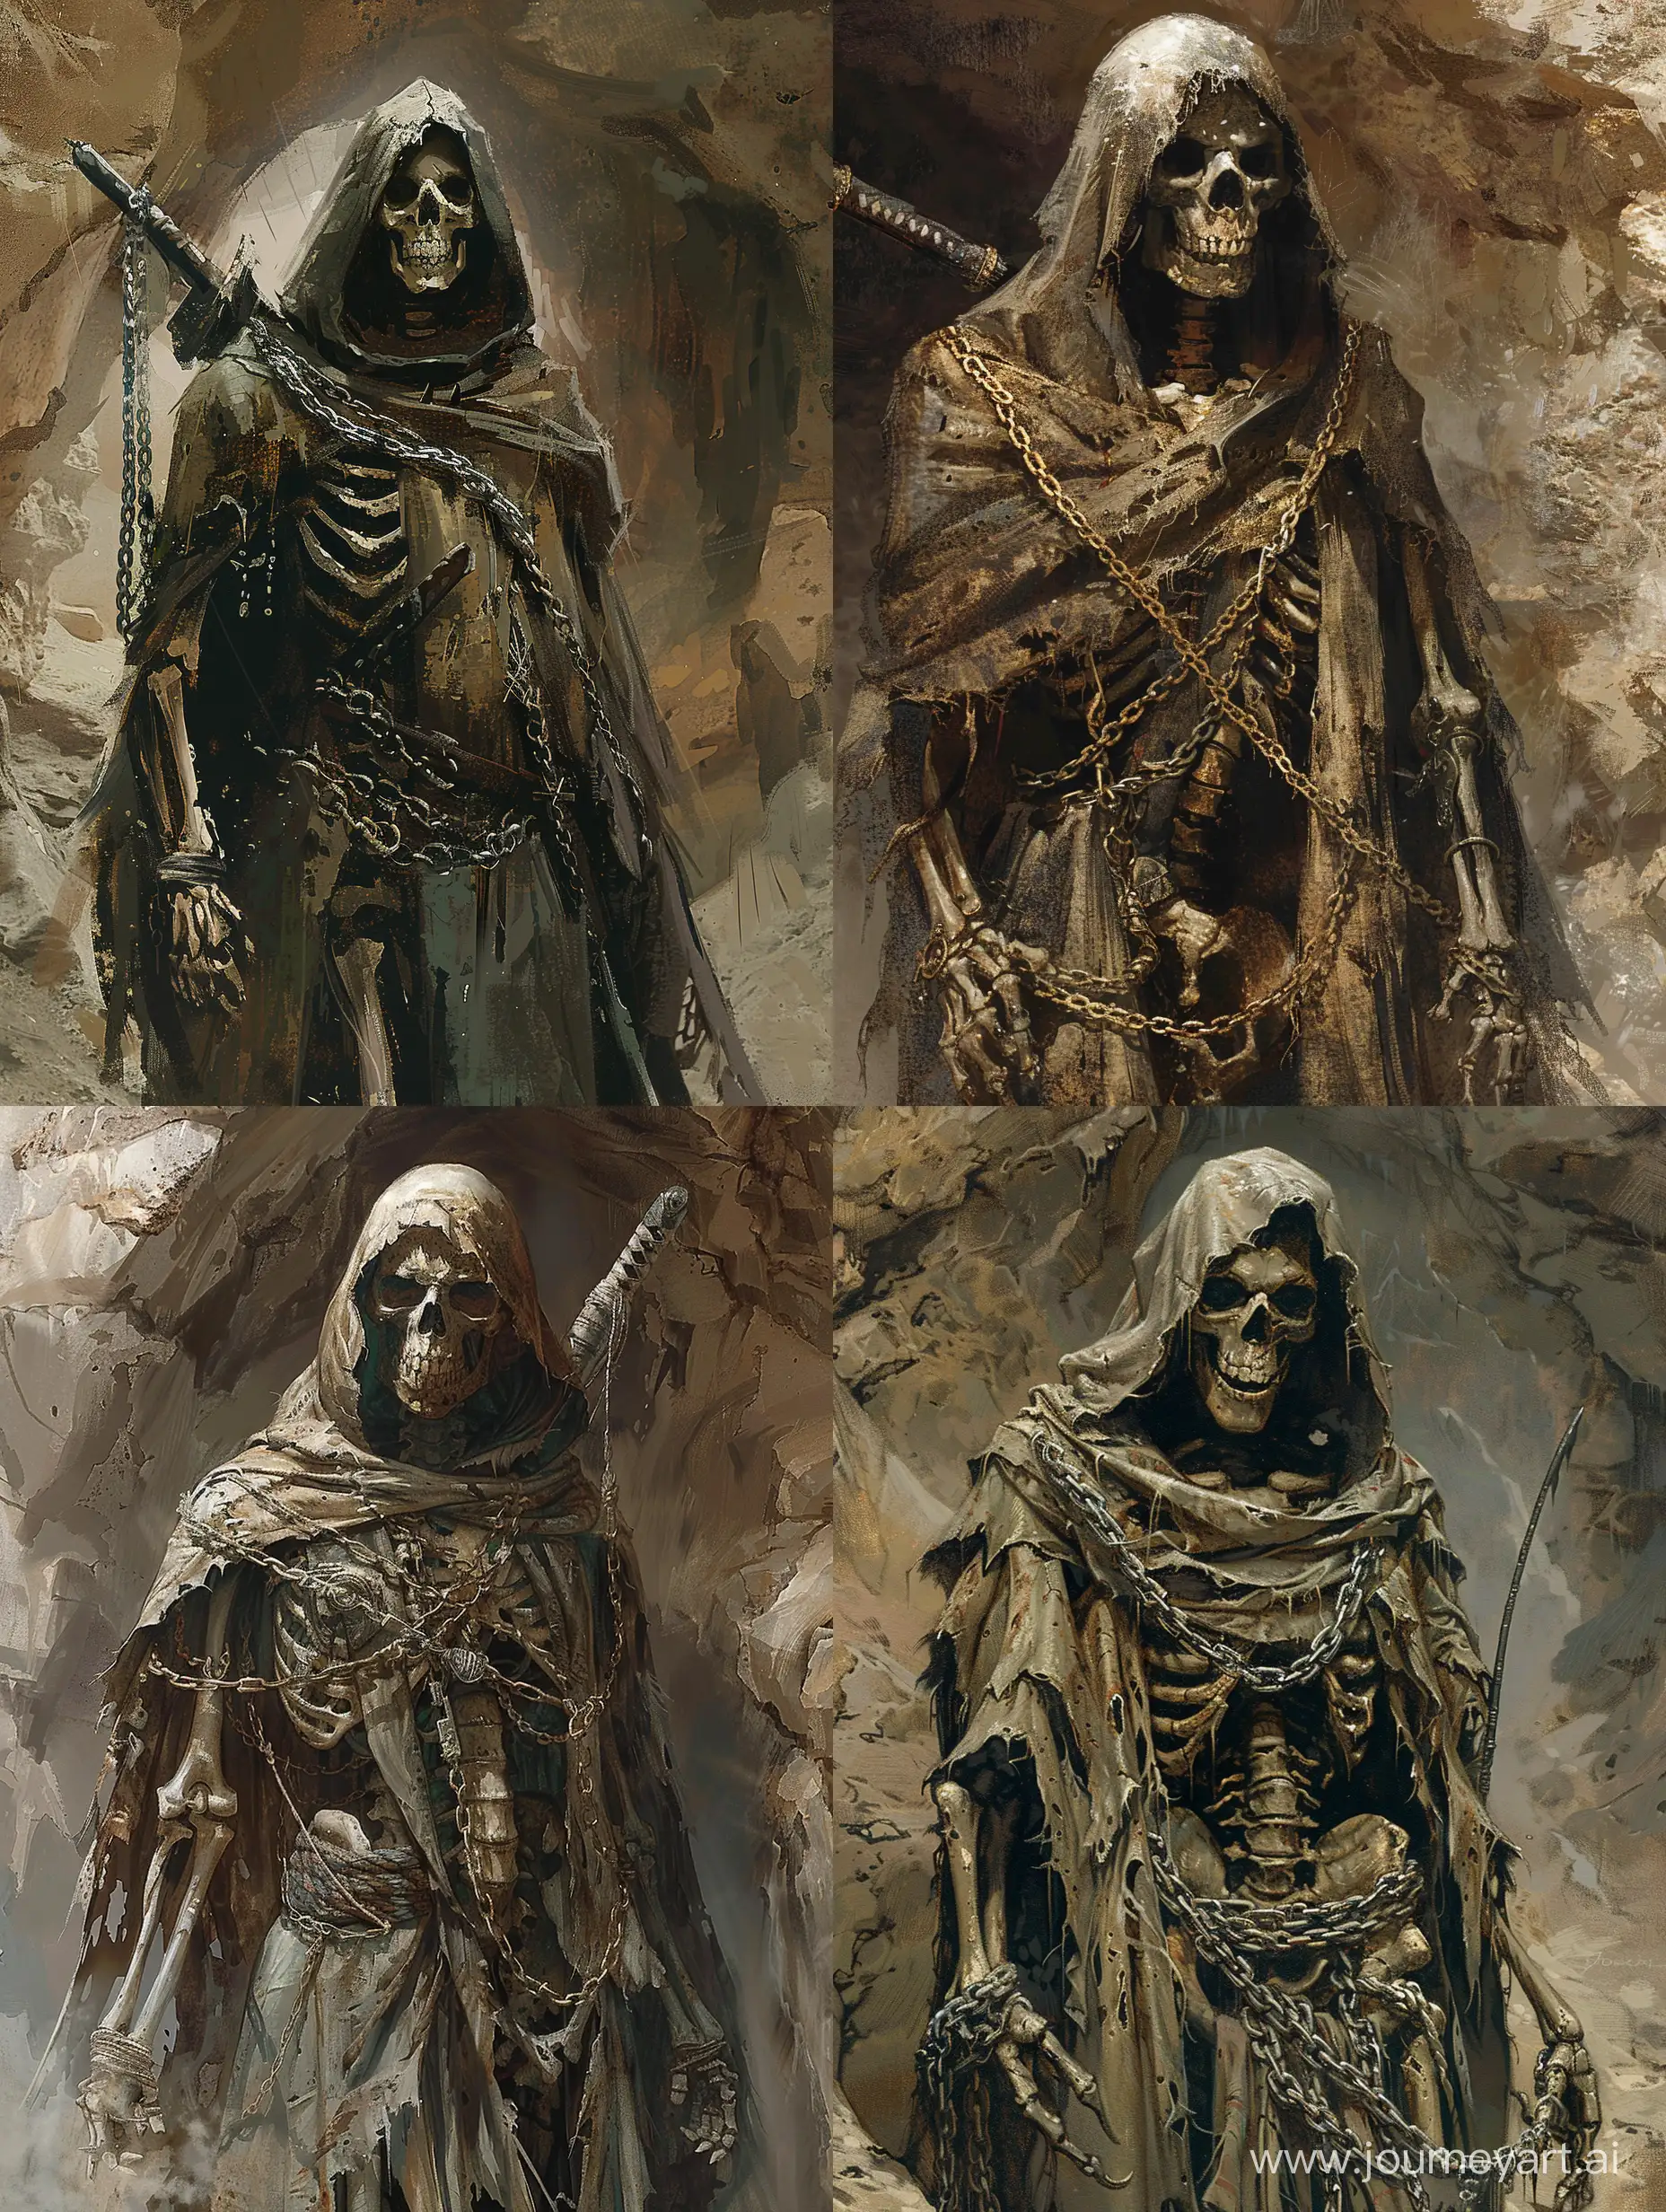 Skeleton warrior [ The central subject is a skeletal being draped in tattered robes and armor. The figure wears a hooded cloak, obscuring most of its skull-like face. Only the empty eye sockets and an open mouth are visible. The robes are worn and torn, suggesting age or neglect. Chains are wrapped around its body, adding to the eerie ambiance. The background is rendered in muted tones, enhancing the overall sense of foreboding. The figure stands against this backdrop, exuding an aura of ancient malevolence]with robe and hood,naginata on the back , in a cave-like place underground , horror place , incredible detail,terrifying,fantasy.